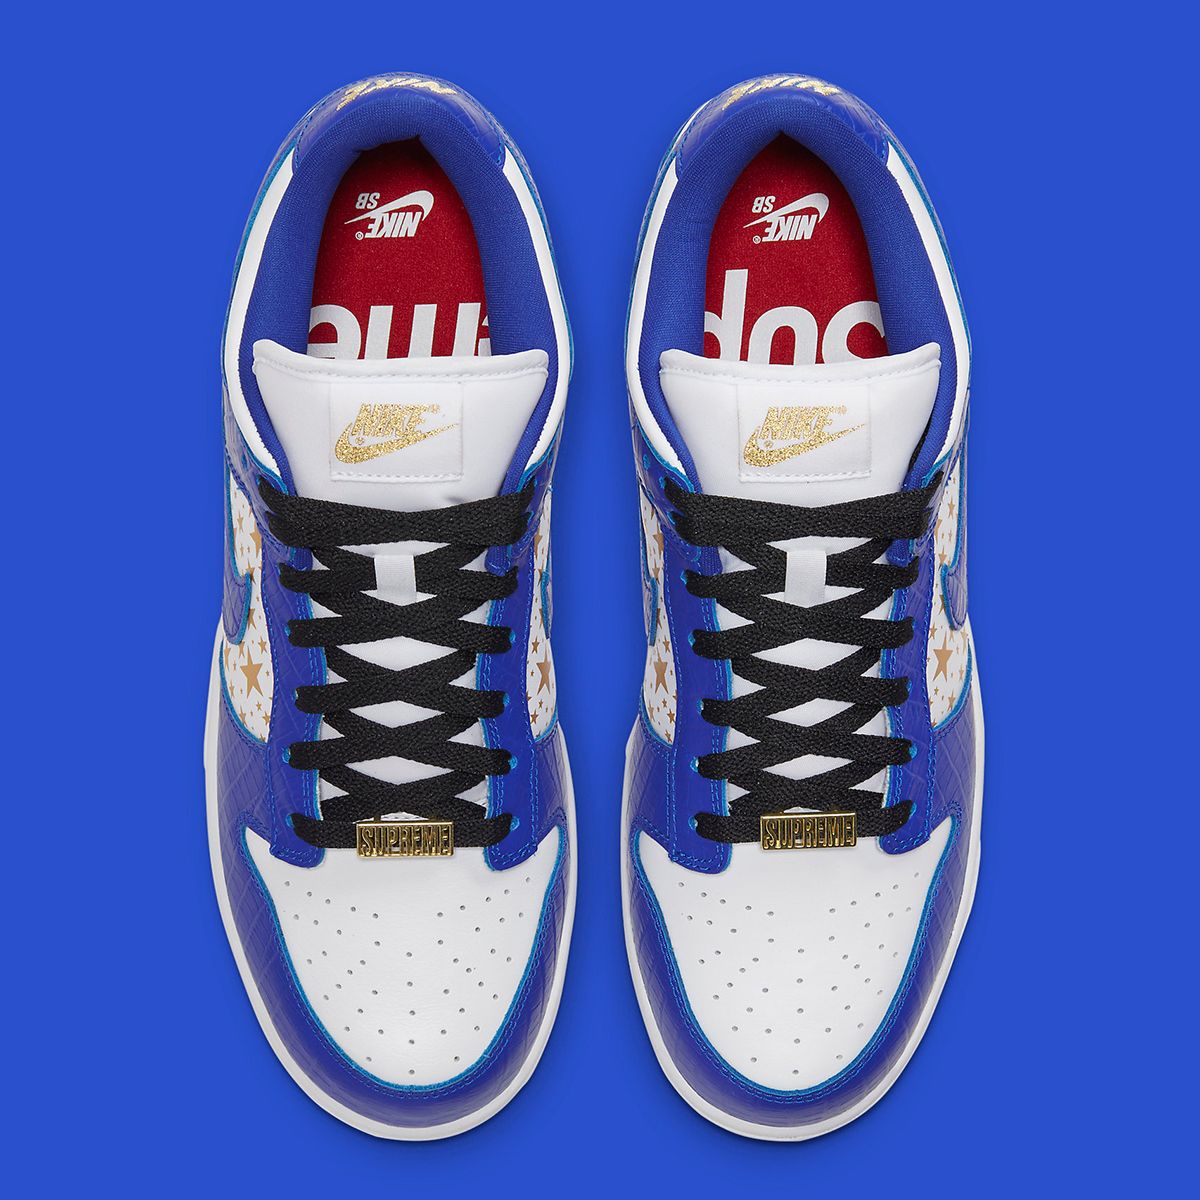 Supreme x Nike SB Dunk Low “Stars” Earmarked for March 4th Release